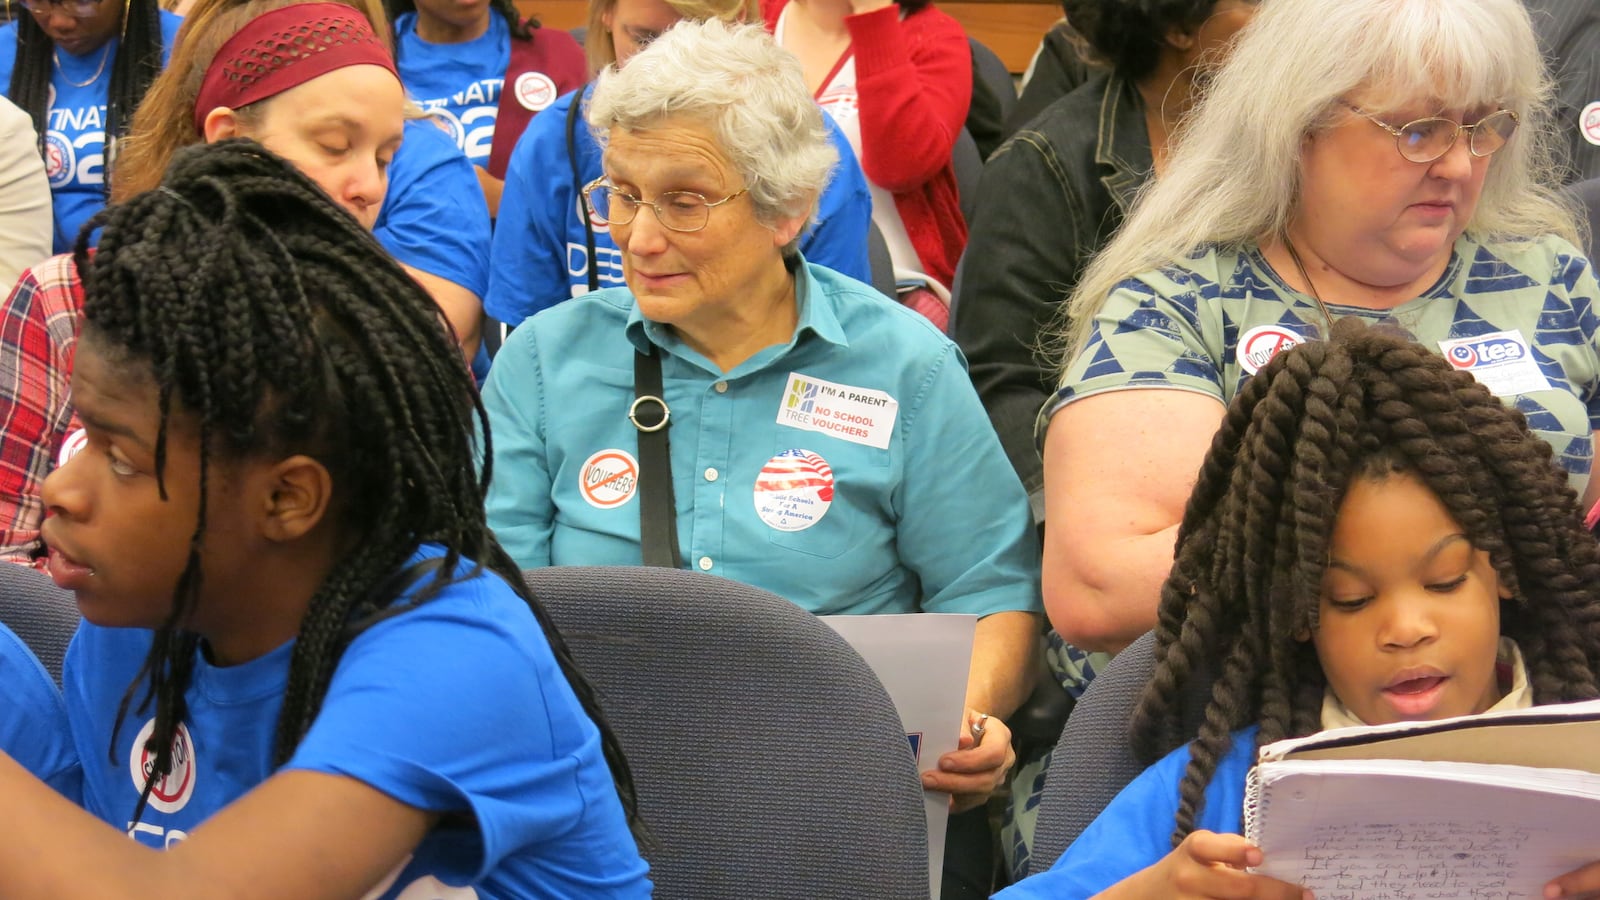 Students, parents and activists against vouchers fill a committee room at the Tennessee State Capitol.